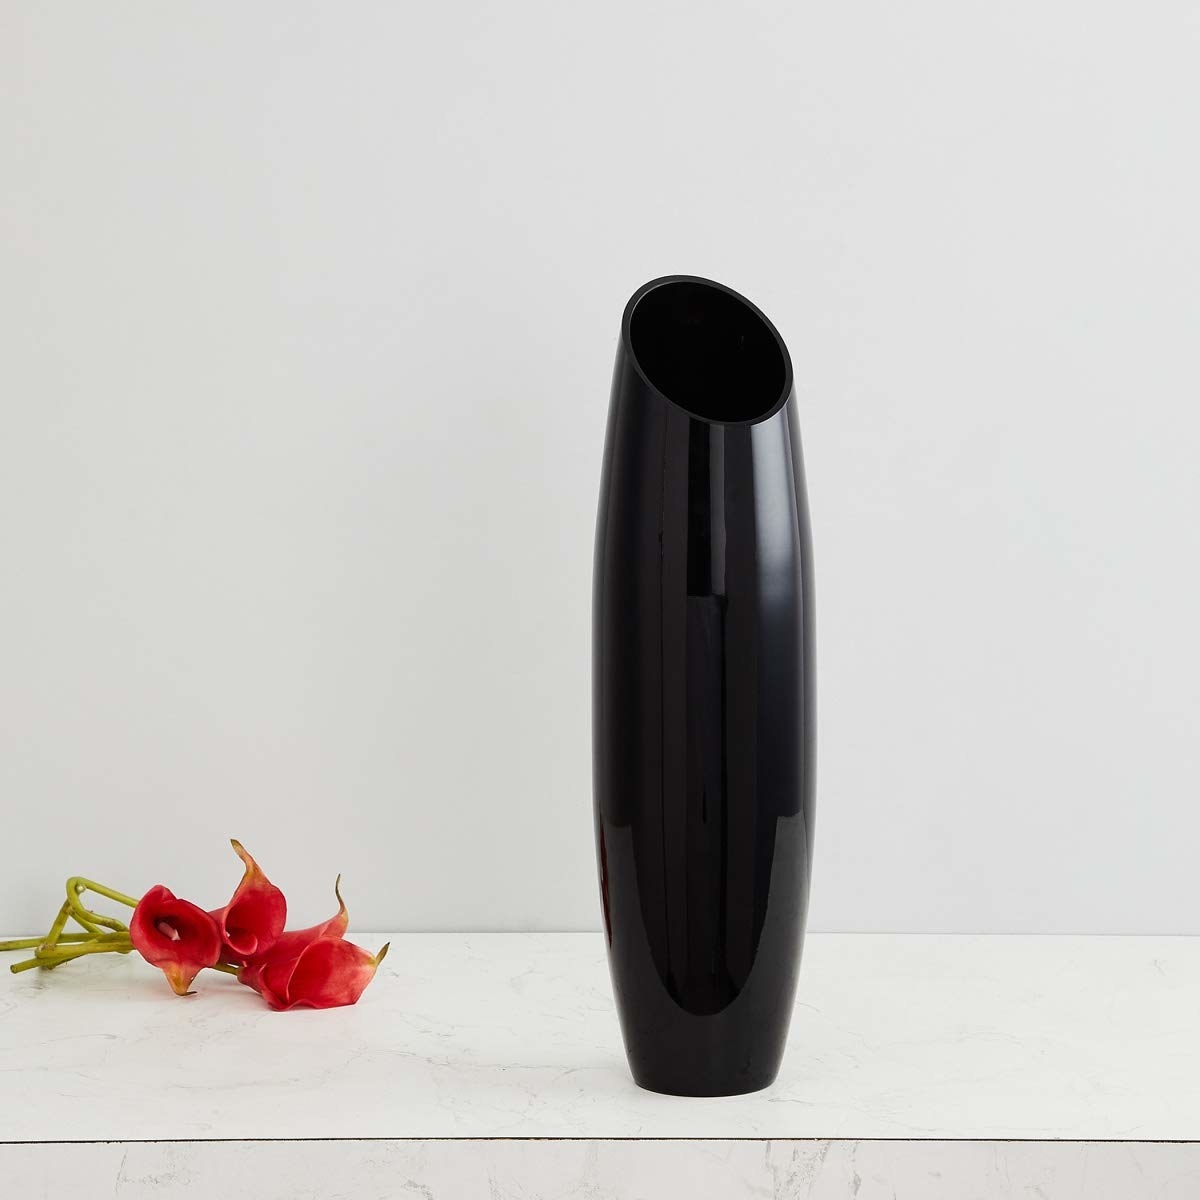 A black vase on the table 